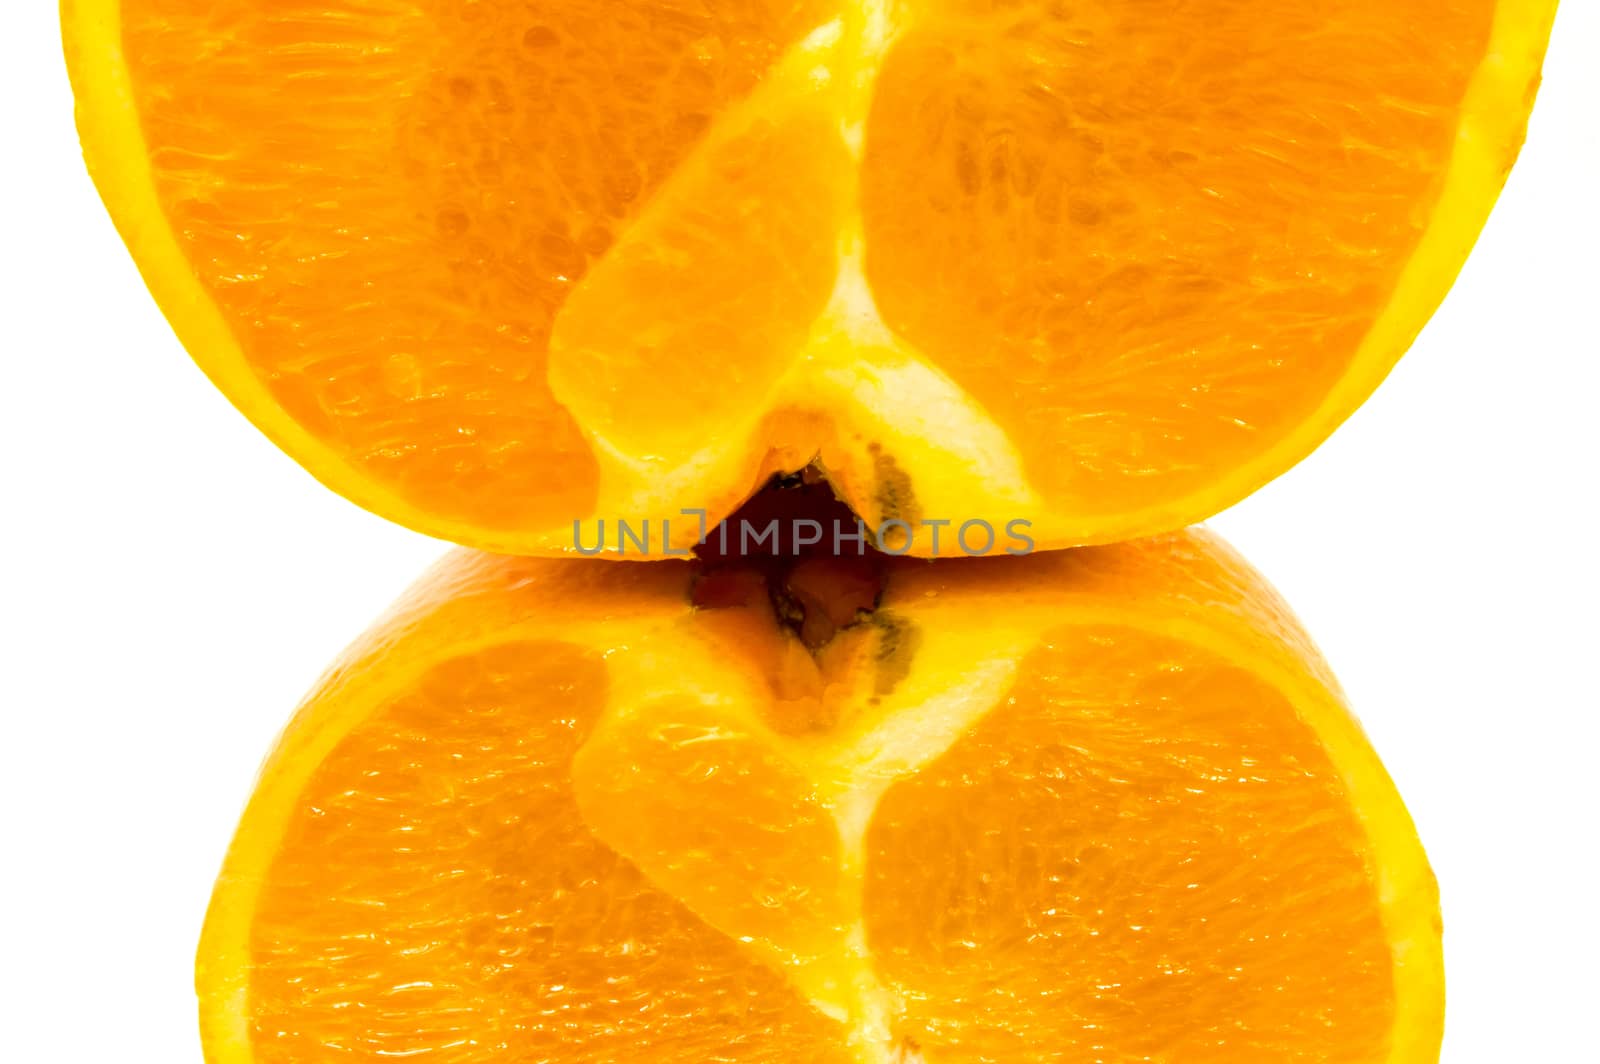 Close-up on a quarter of orange with a reflection on a white background